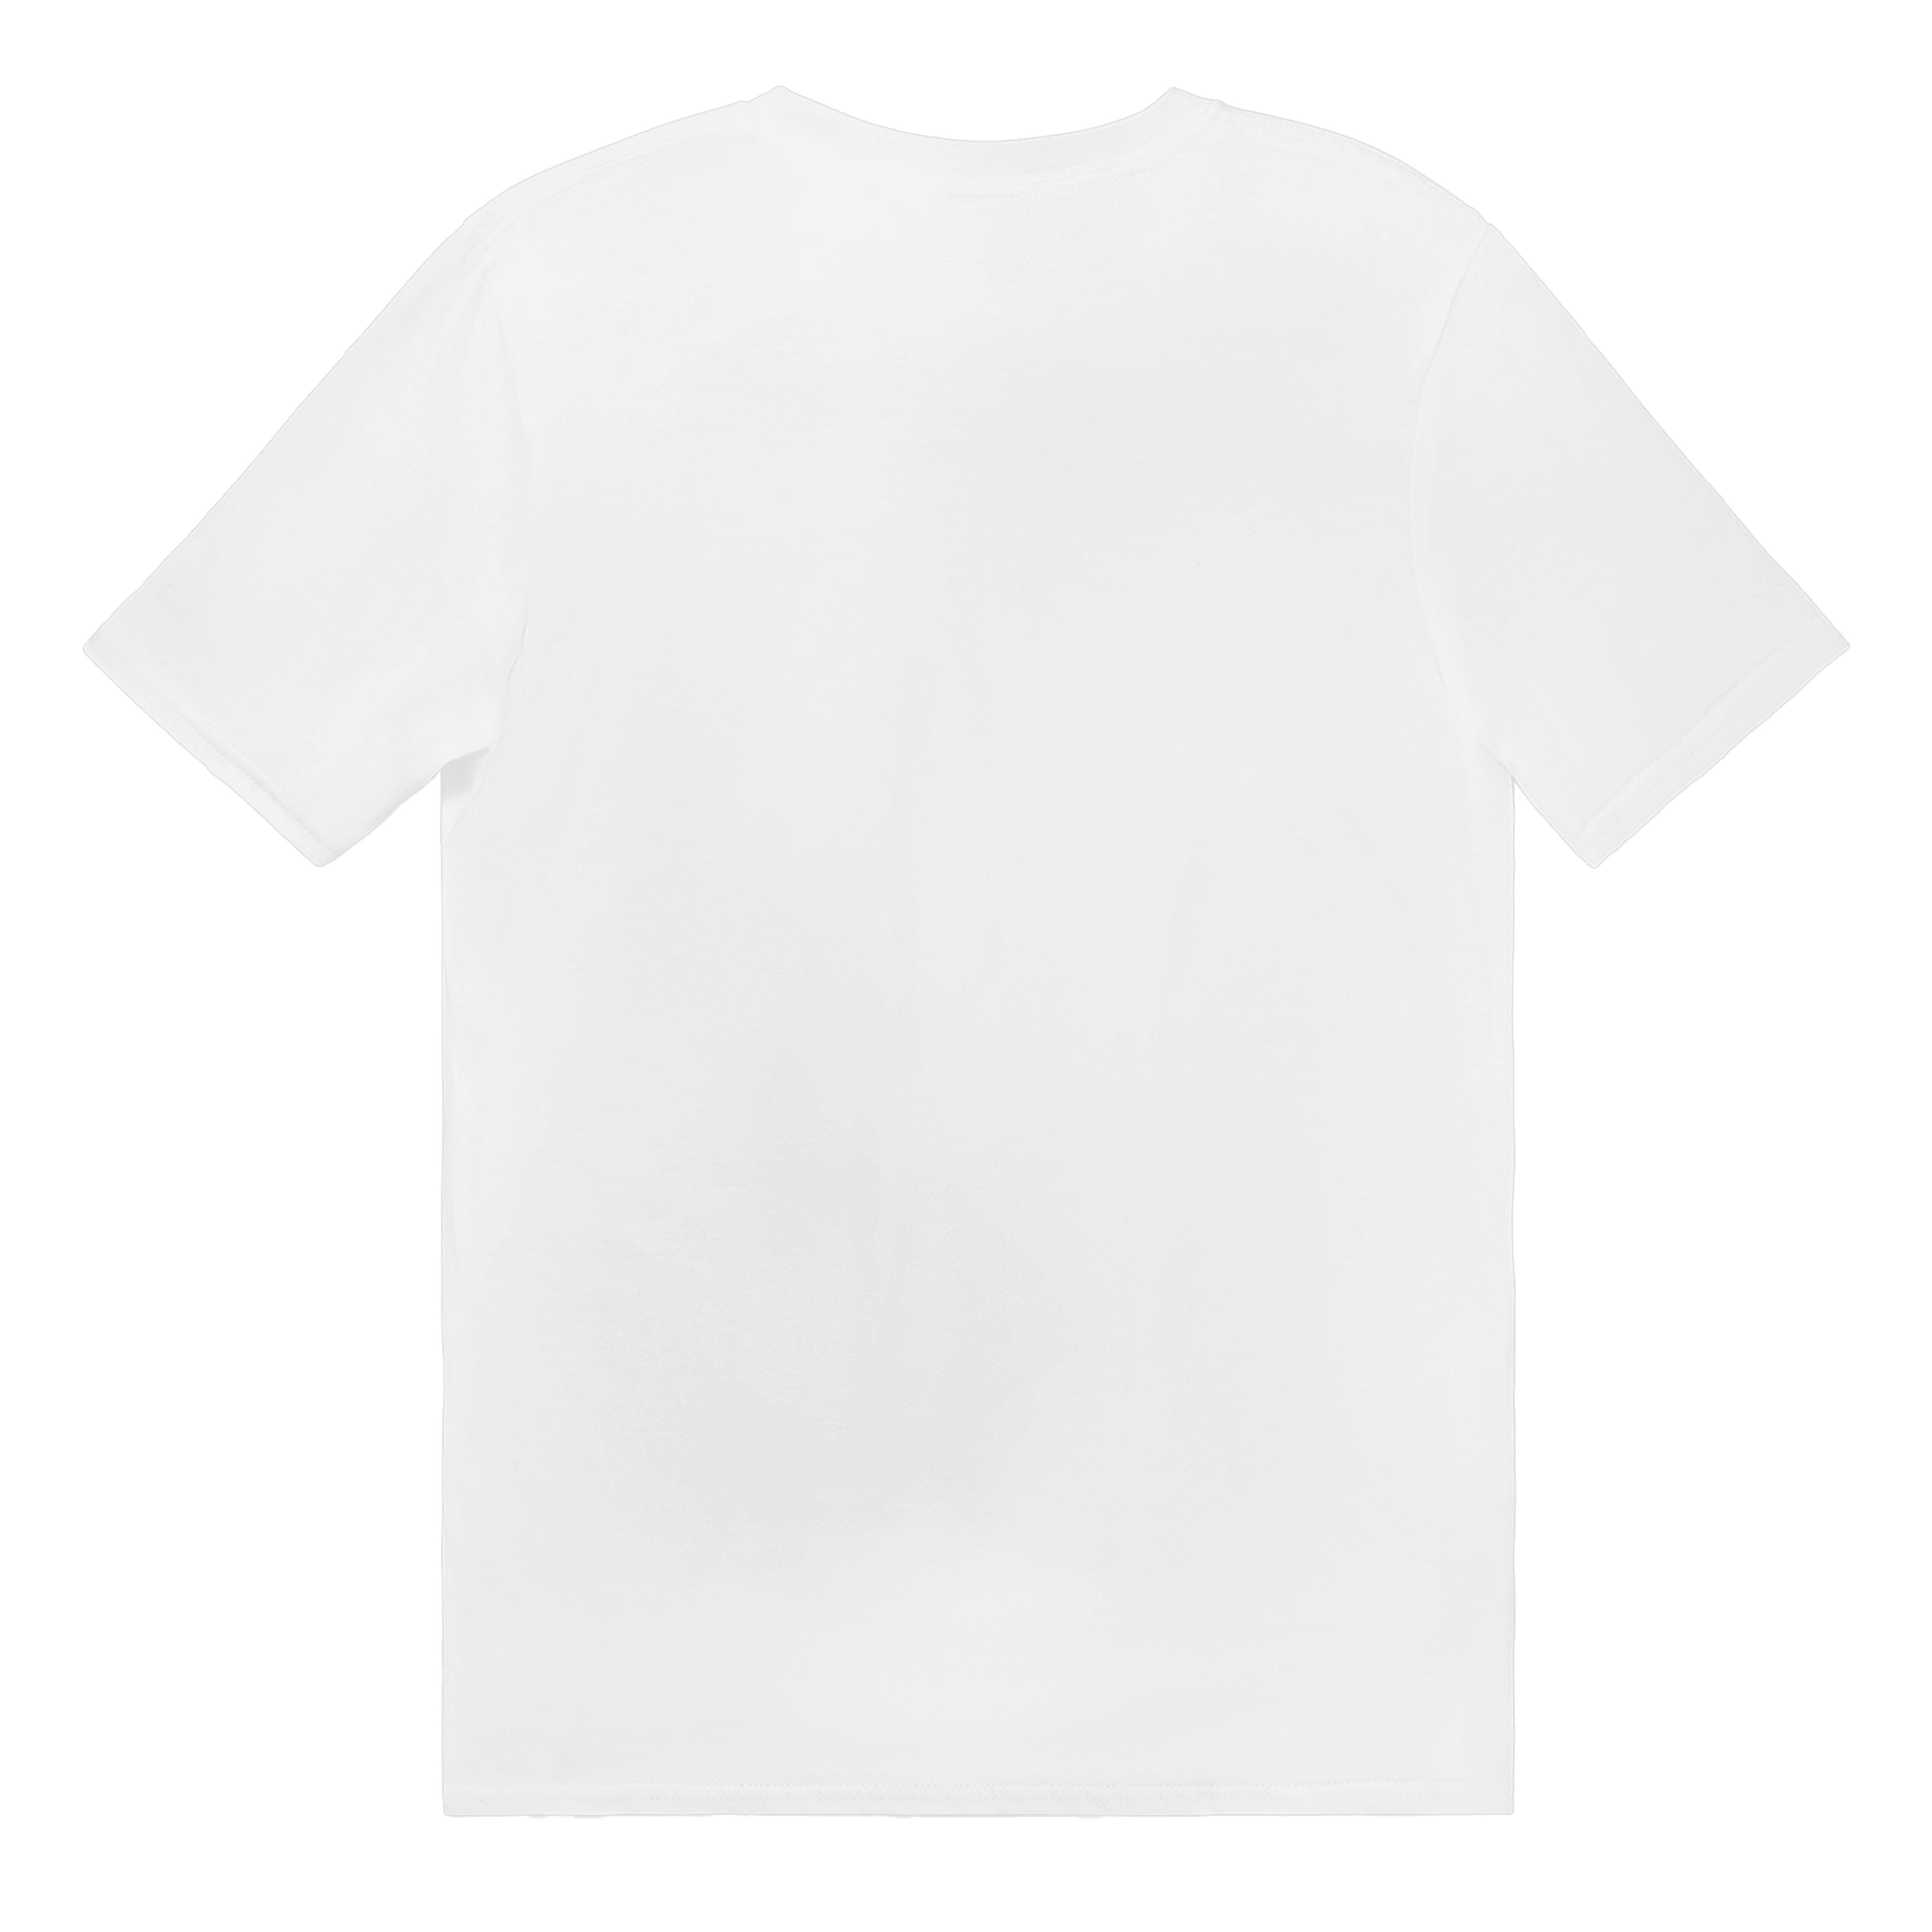 Cold Beer Fan Club - T-shirt 